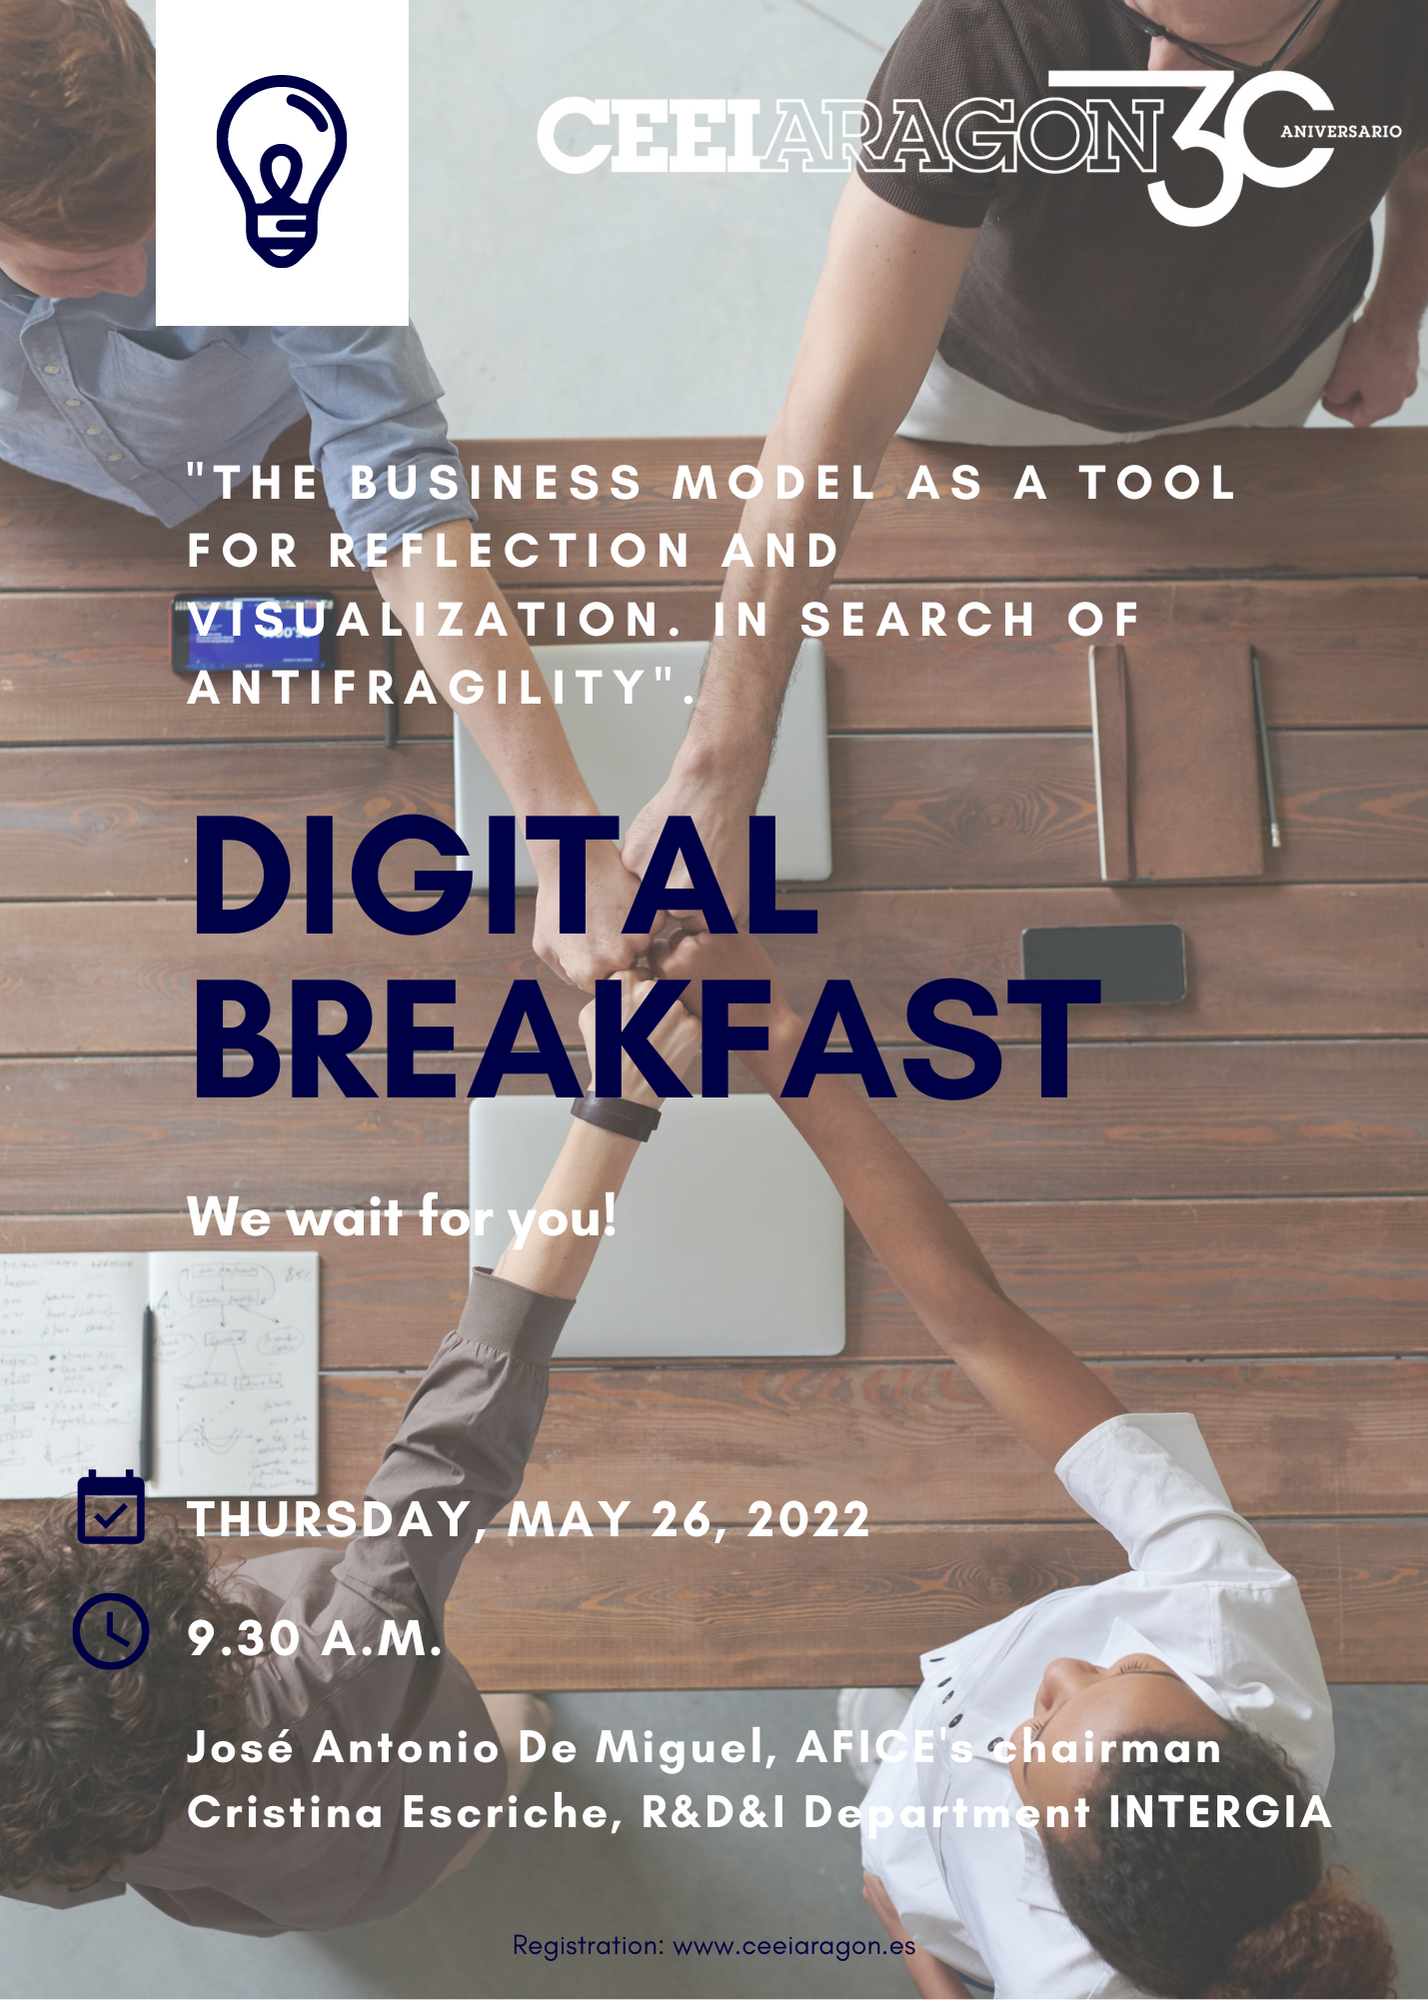 CEEI Digital Breakfast “The business model as a tool for reflection and visualization, in search of antifragility”